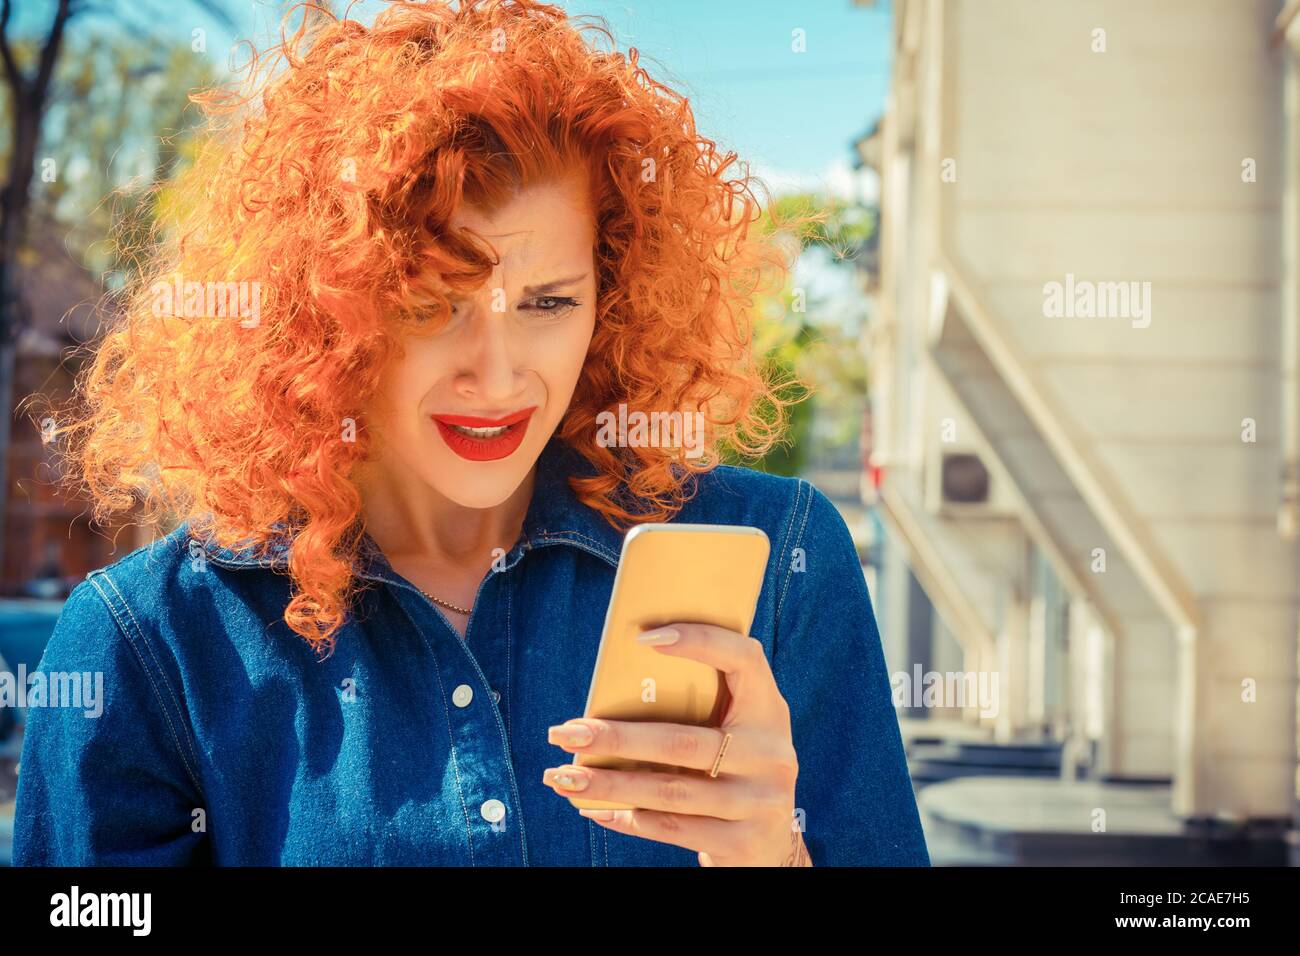 What. Unhappy frustrated angry woman with red curly hair looking to mobile phone, reading sms or something, standing outside city on background. Negat Stock Photo